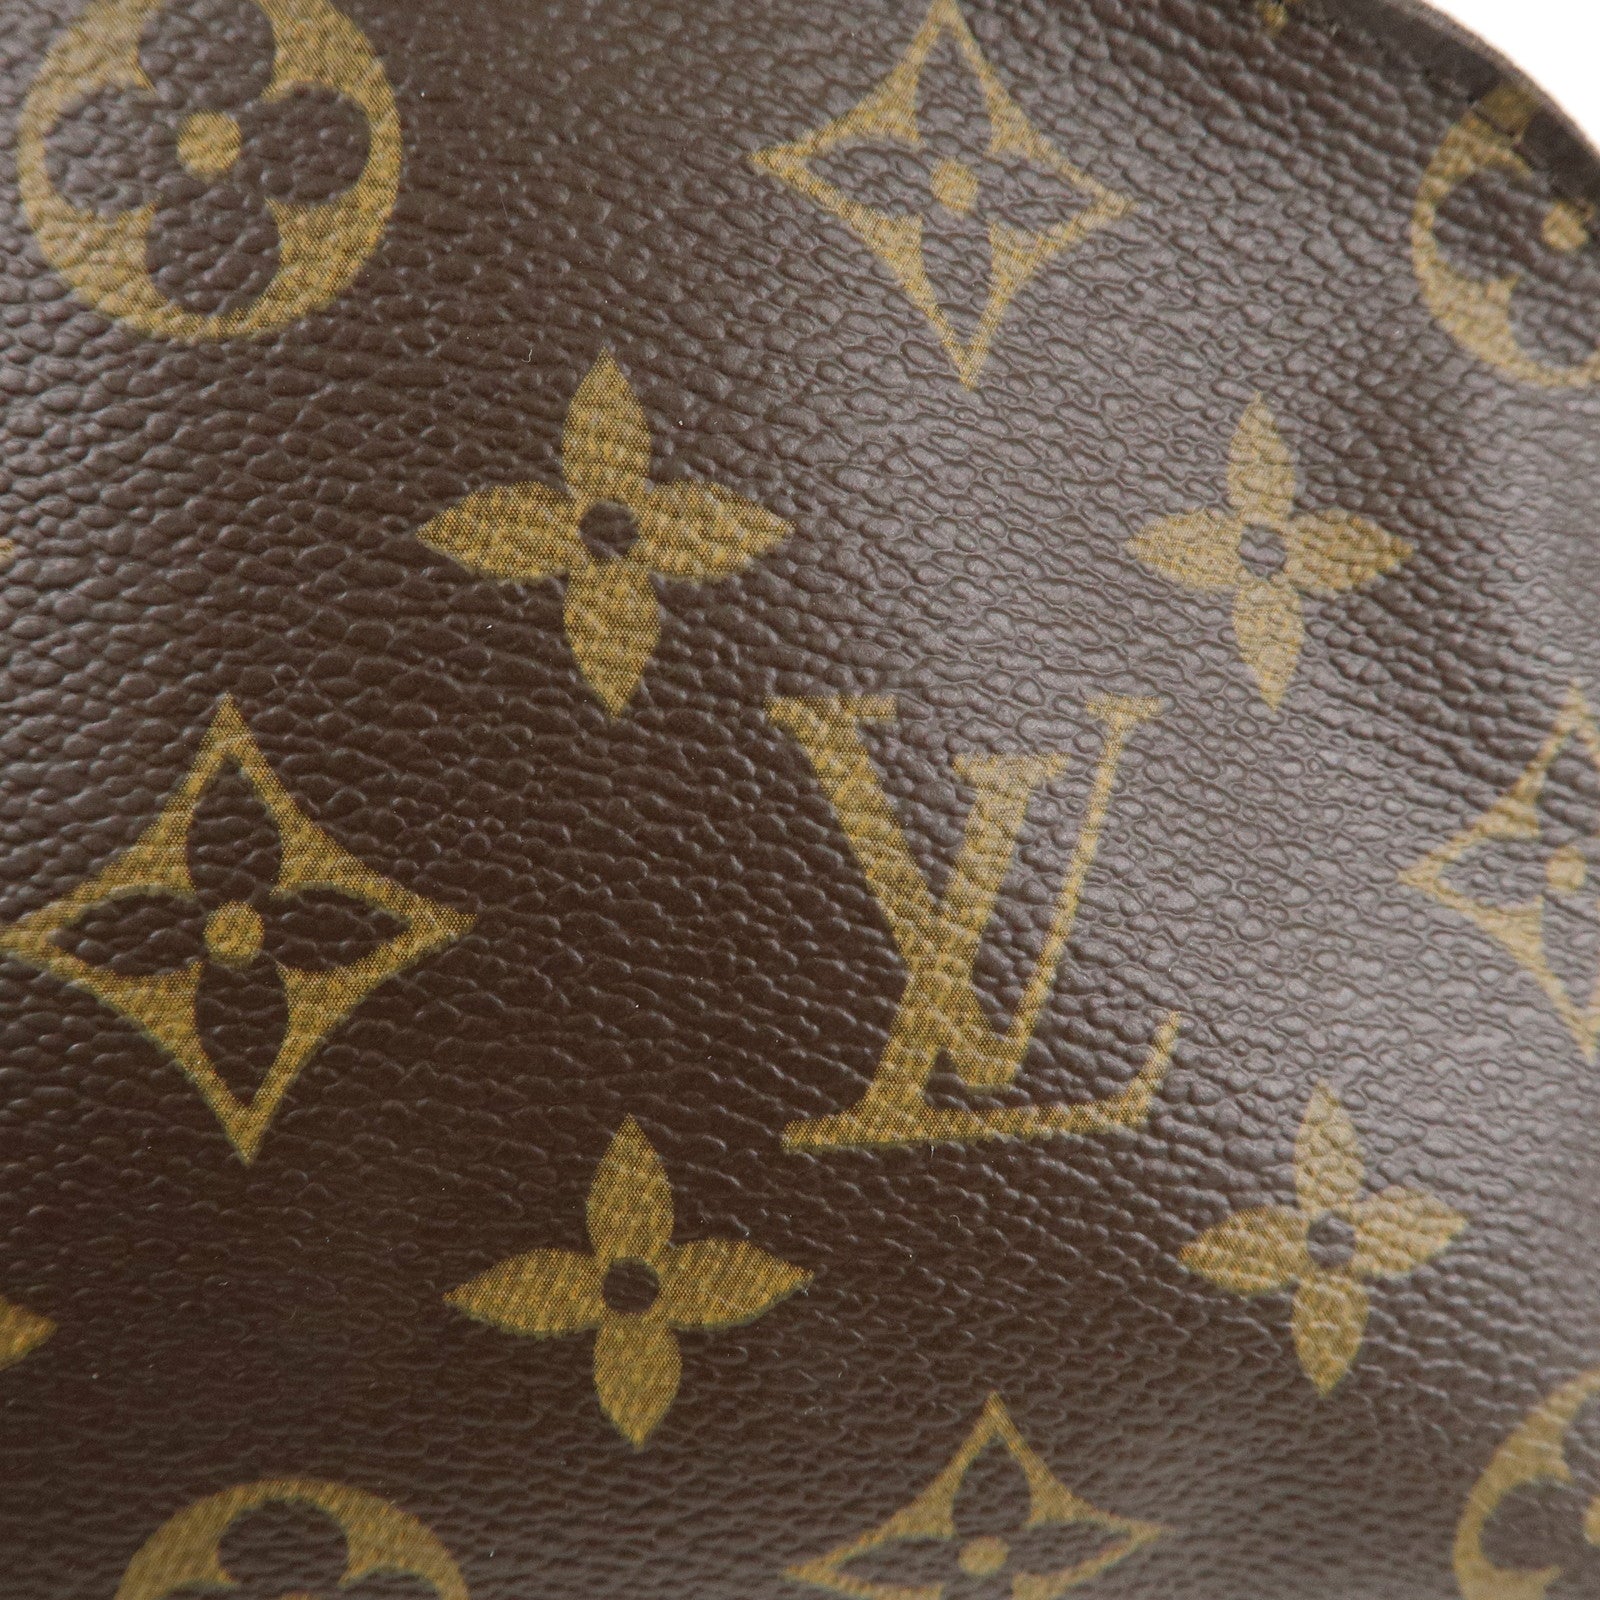 Louis Vuitton Monogram Cosmetic Pouch GM - Brown Cosmetic Bags